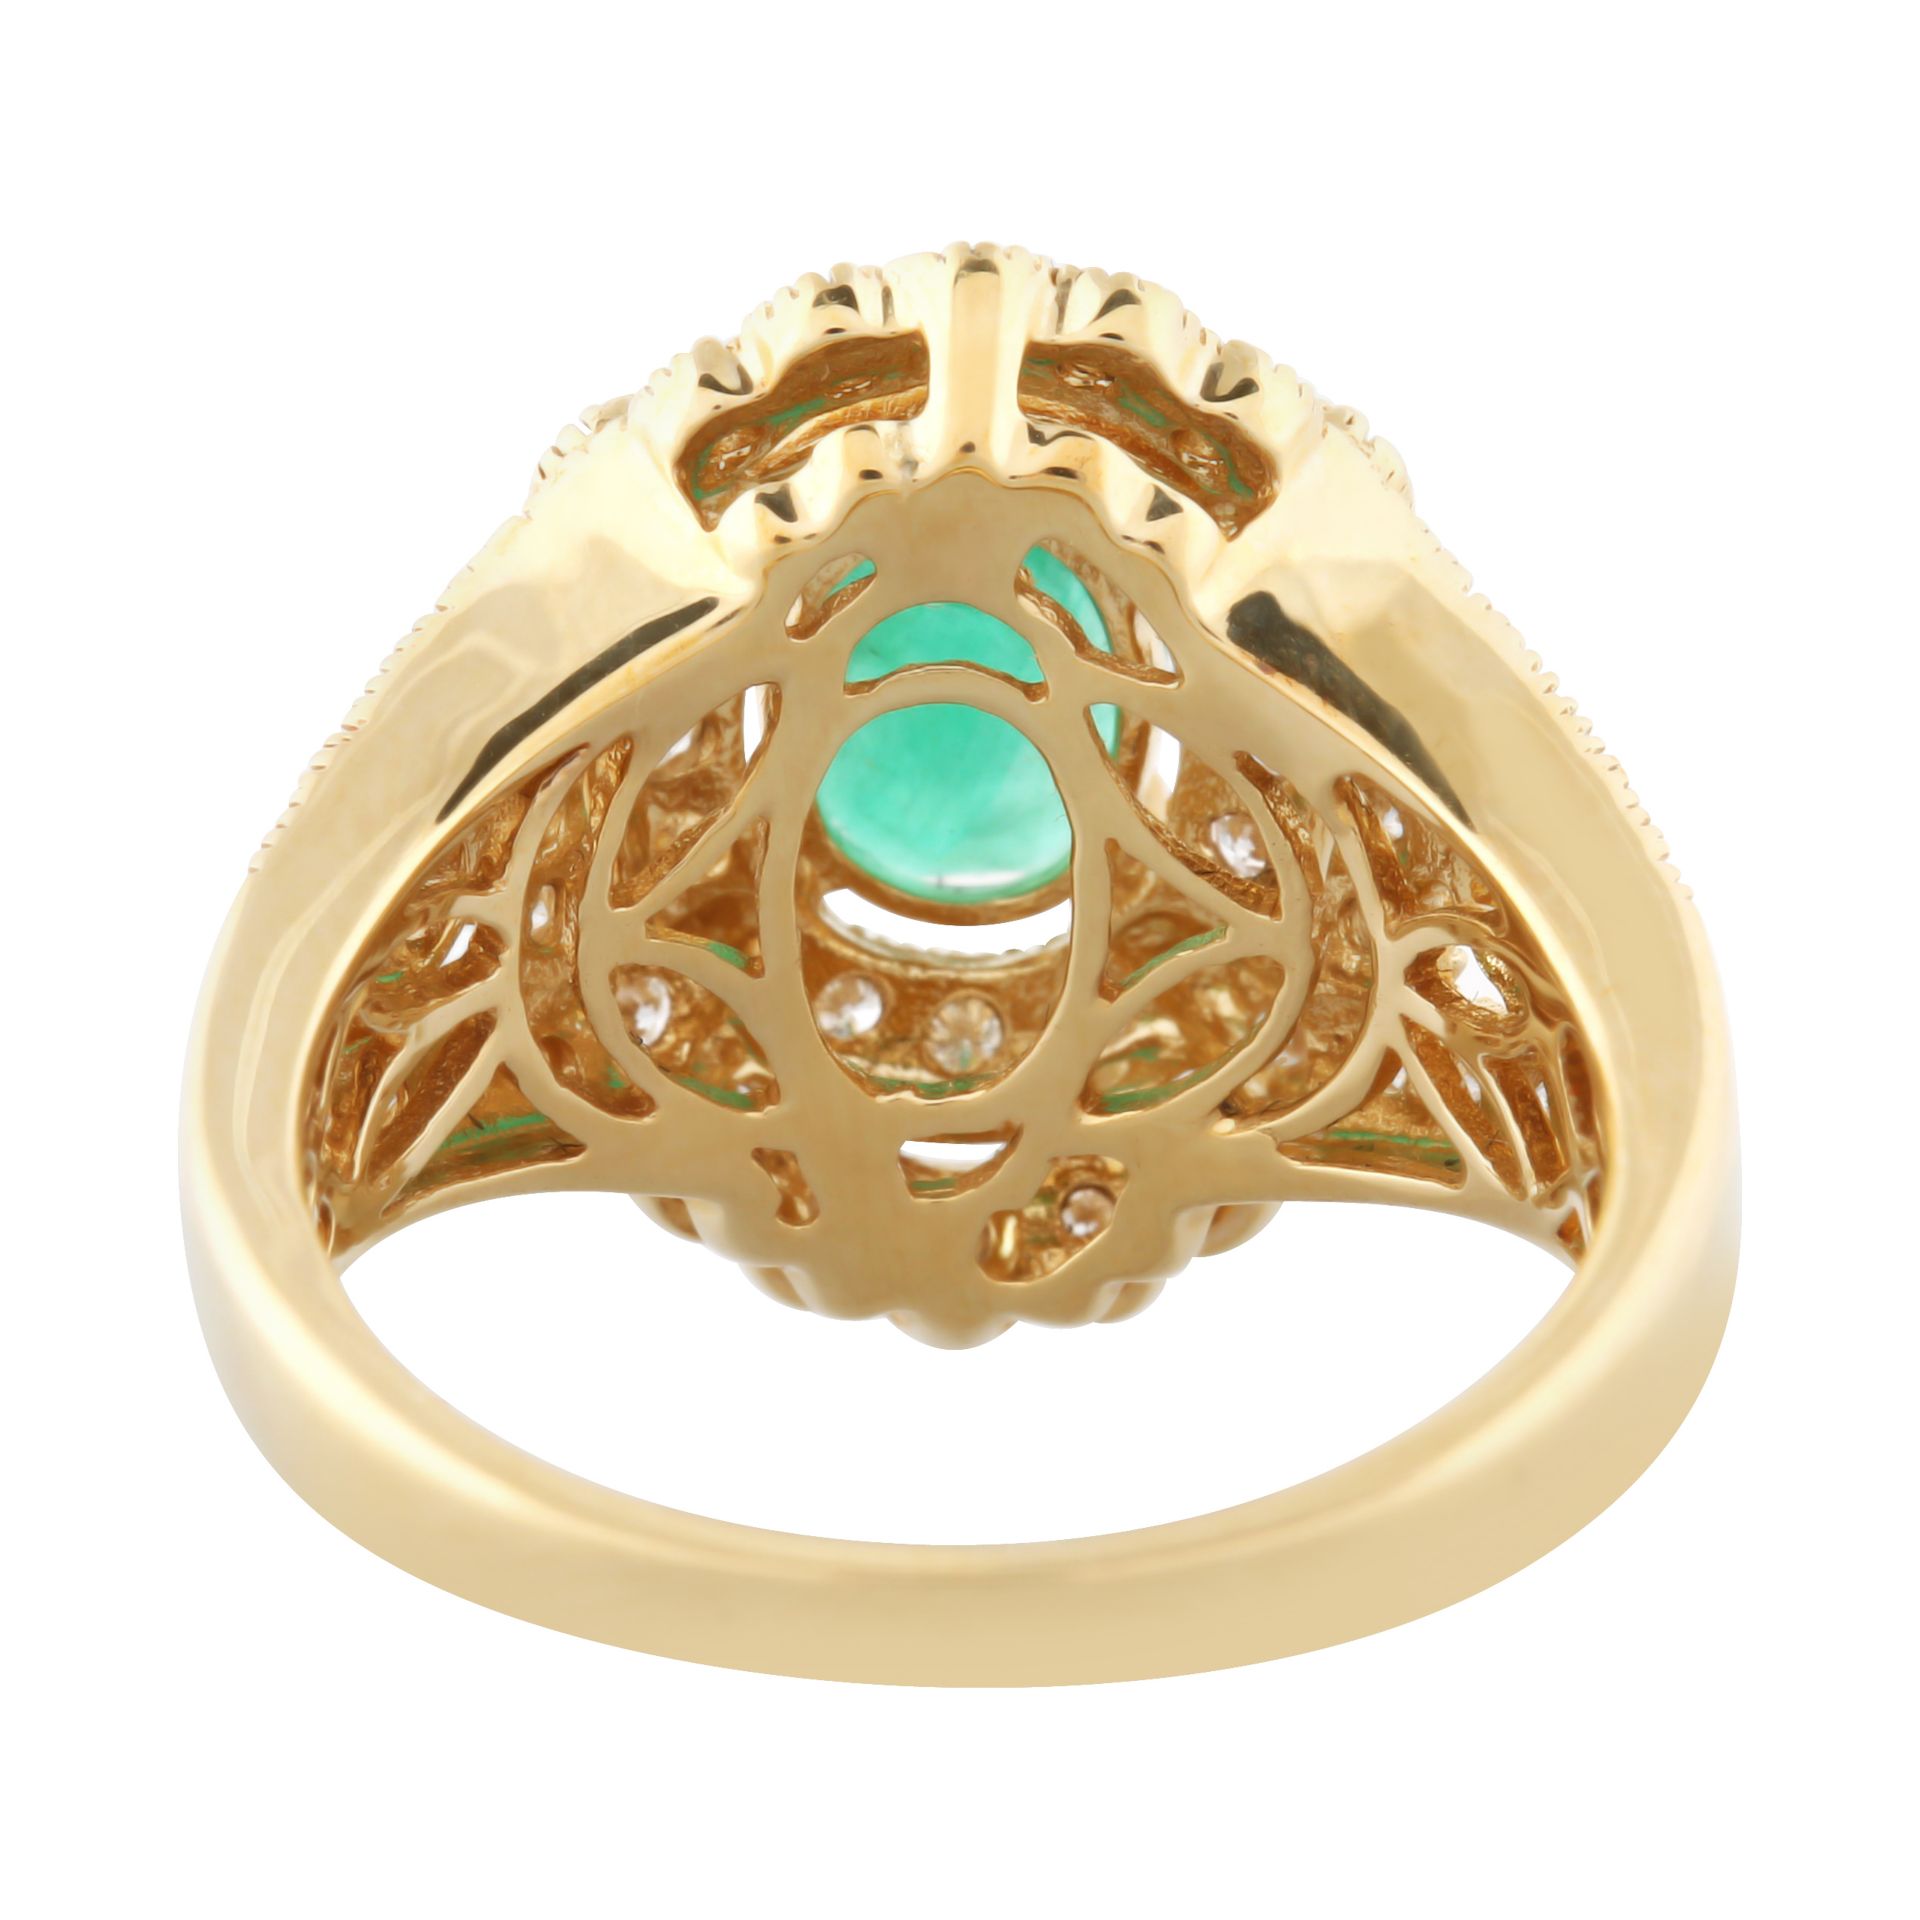 EMERALD AND DIAMOND 14KT GOLD RING - Image 3 of 4